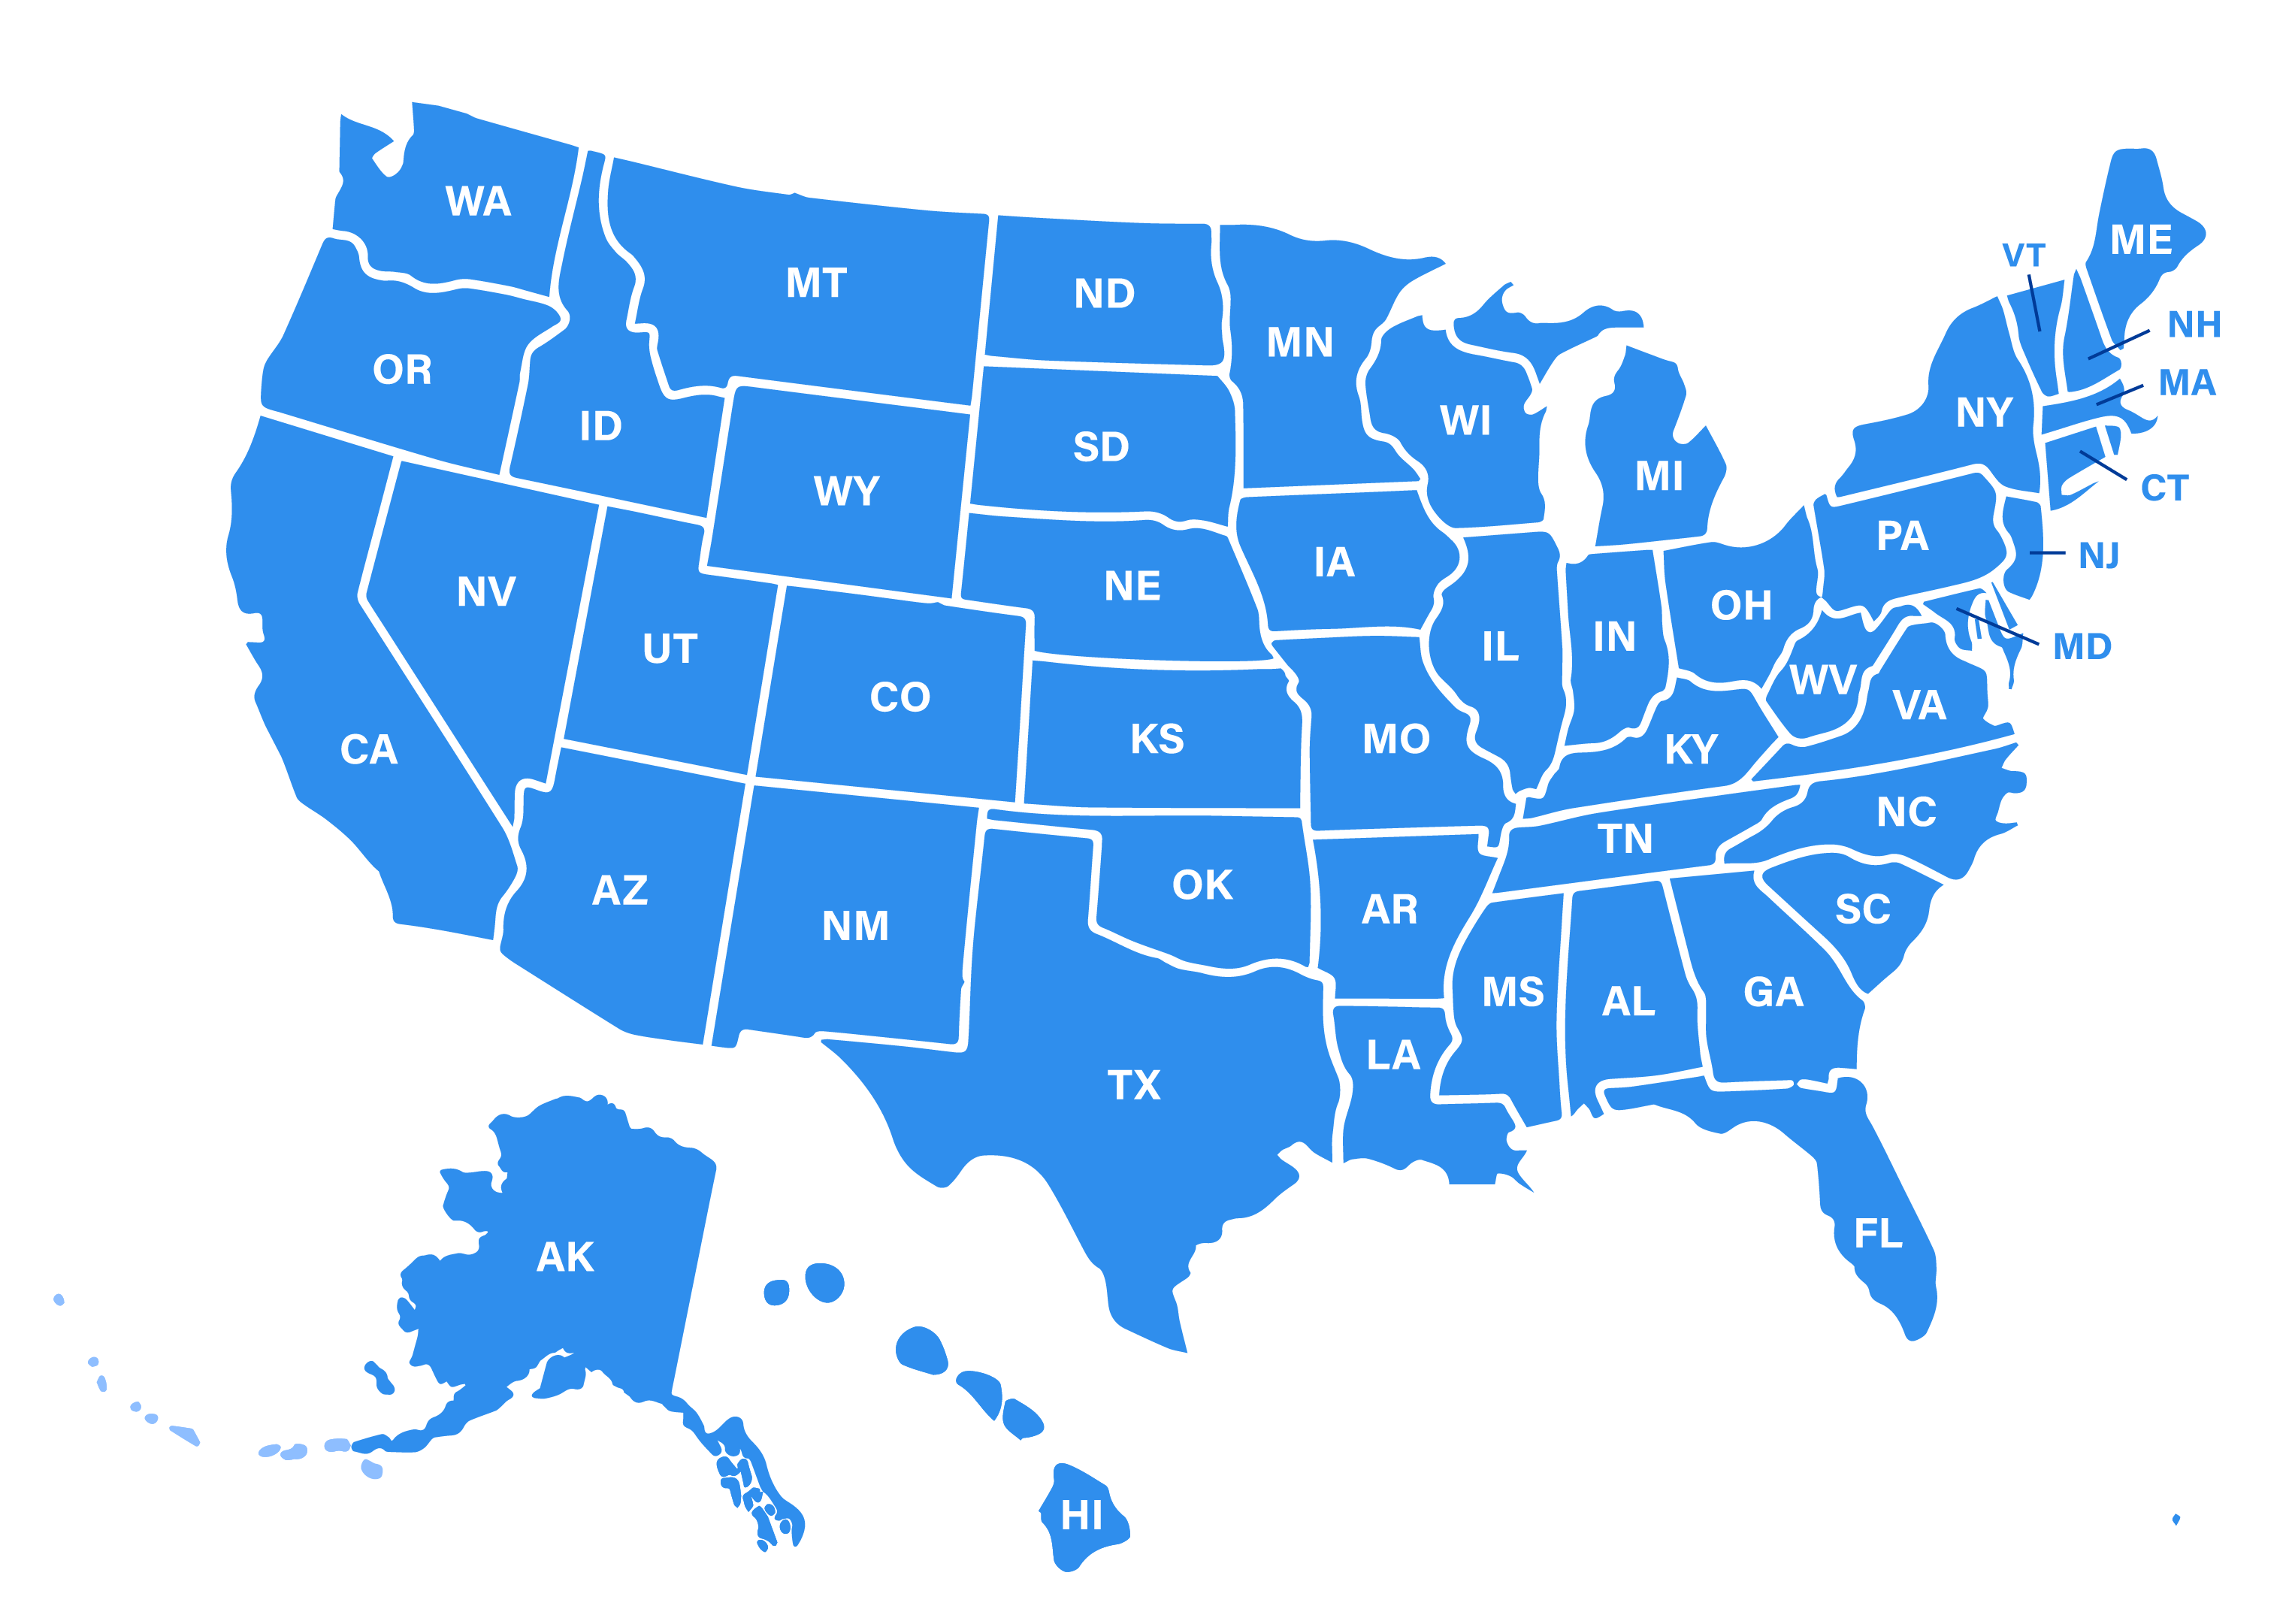 Image of the US Map with initials of the states